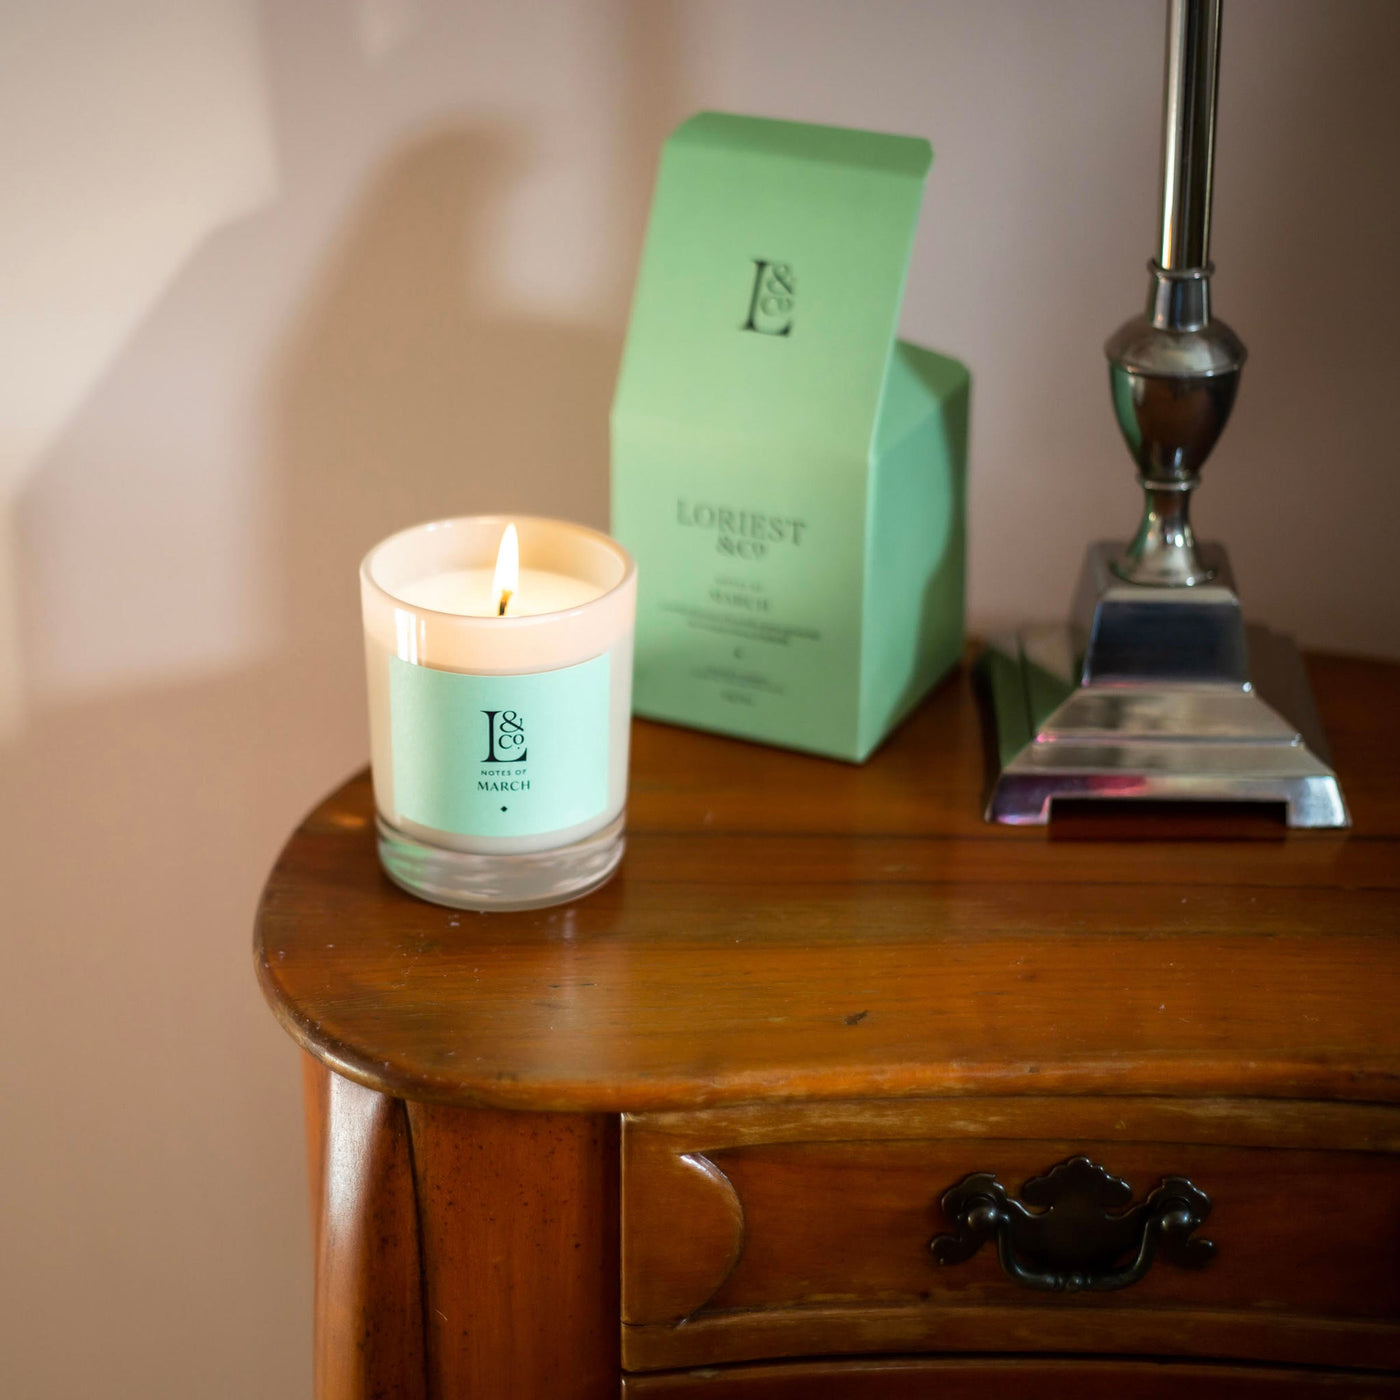 Notes of March luxury scented candle from the Loriest spring collection. Sustainable natural plant-based vegan wax. 60 hours burn time. Hand-poured in the British Isles.